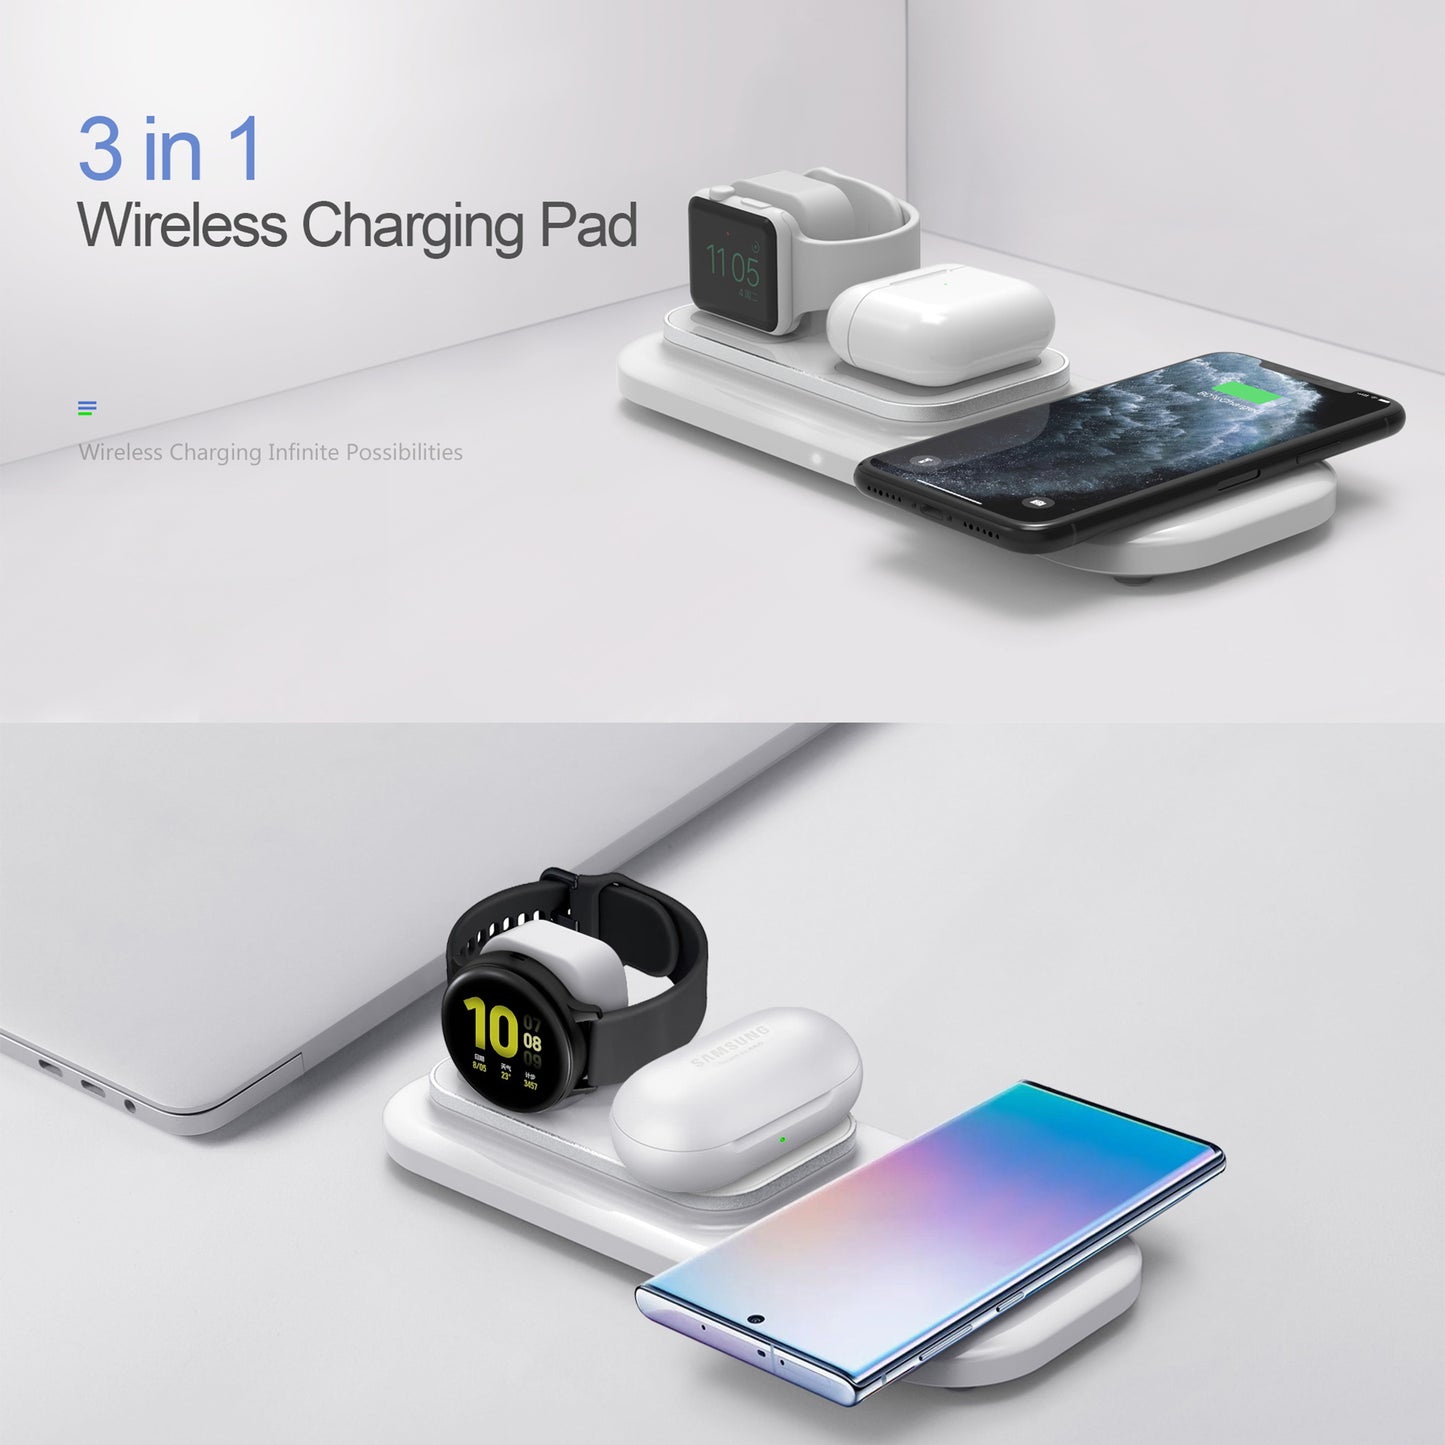 RGBTRON DT-X3 Wireless Charger 3 in 1, PowerWave Pad, Qi-Certified Compatible iPhone 12, 12 Mini, 12 Pro Max, 11, 11 Pro, 11 Pro Max, Xs Max, XR, 10W for Galaxy S20 S10 S9, Note 10 (No AC Adapter)